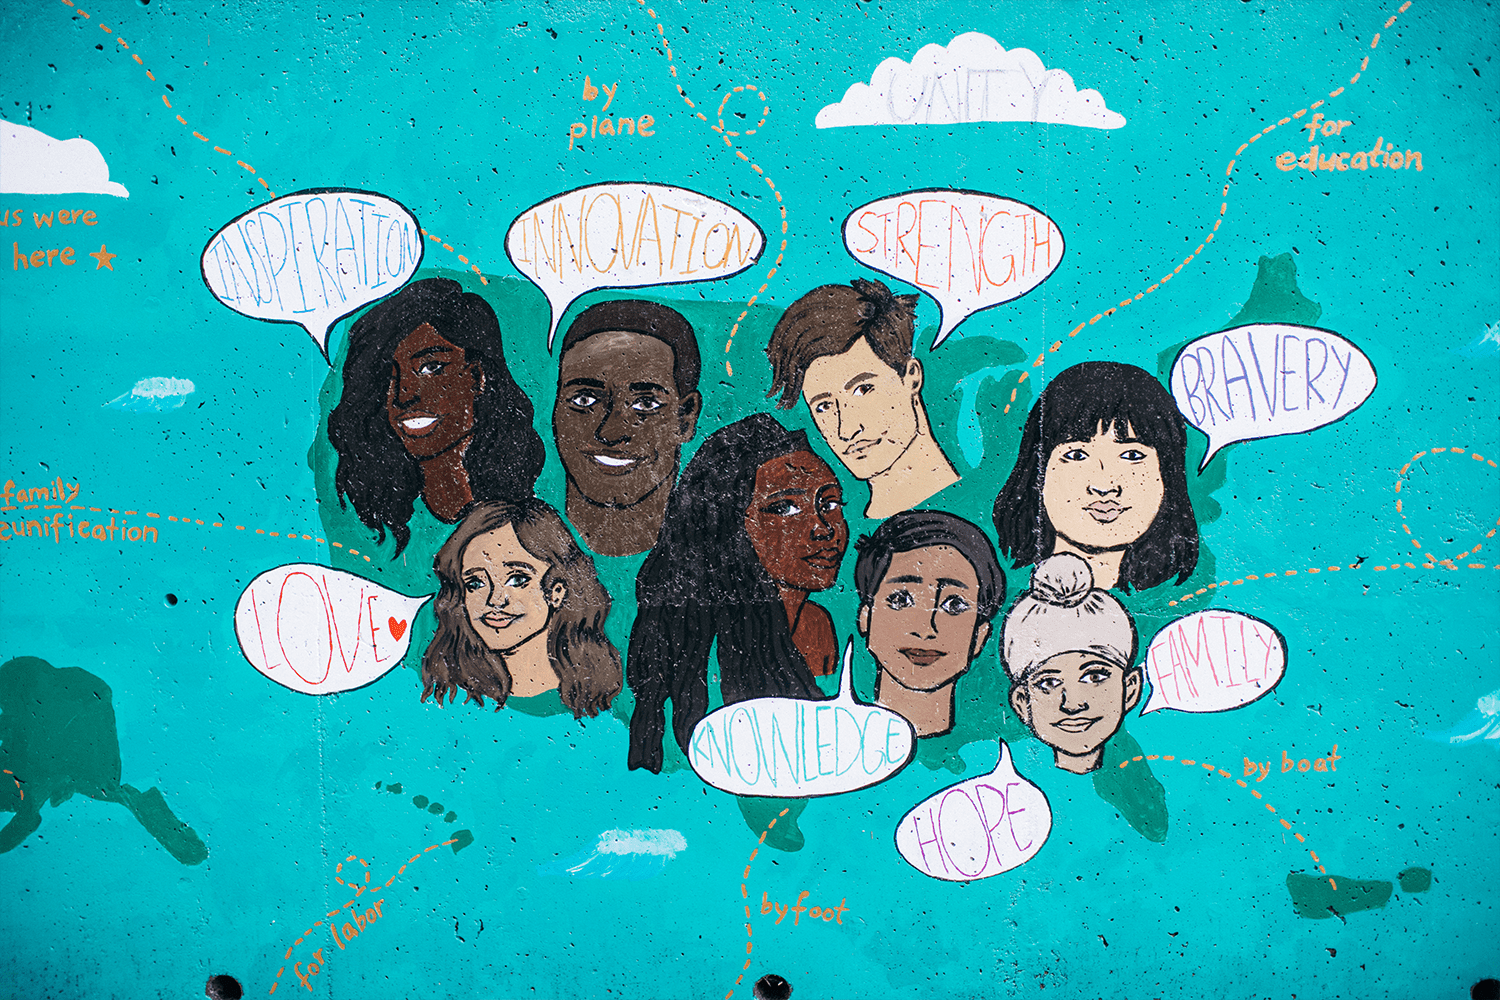 Mural with diverse group of students and the words "family," "love," and "bravery."